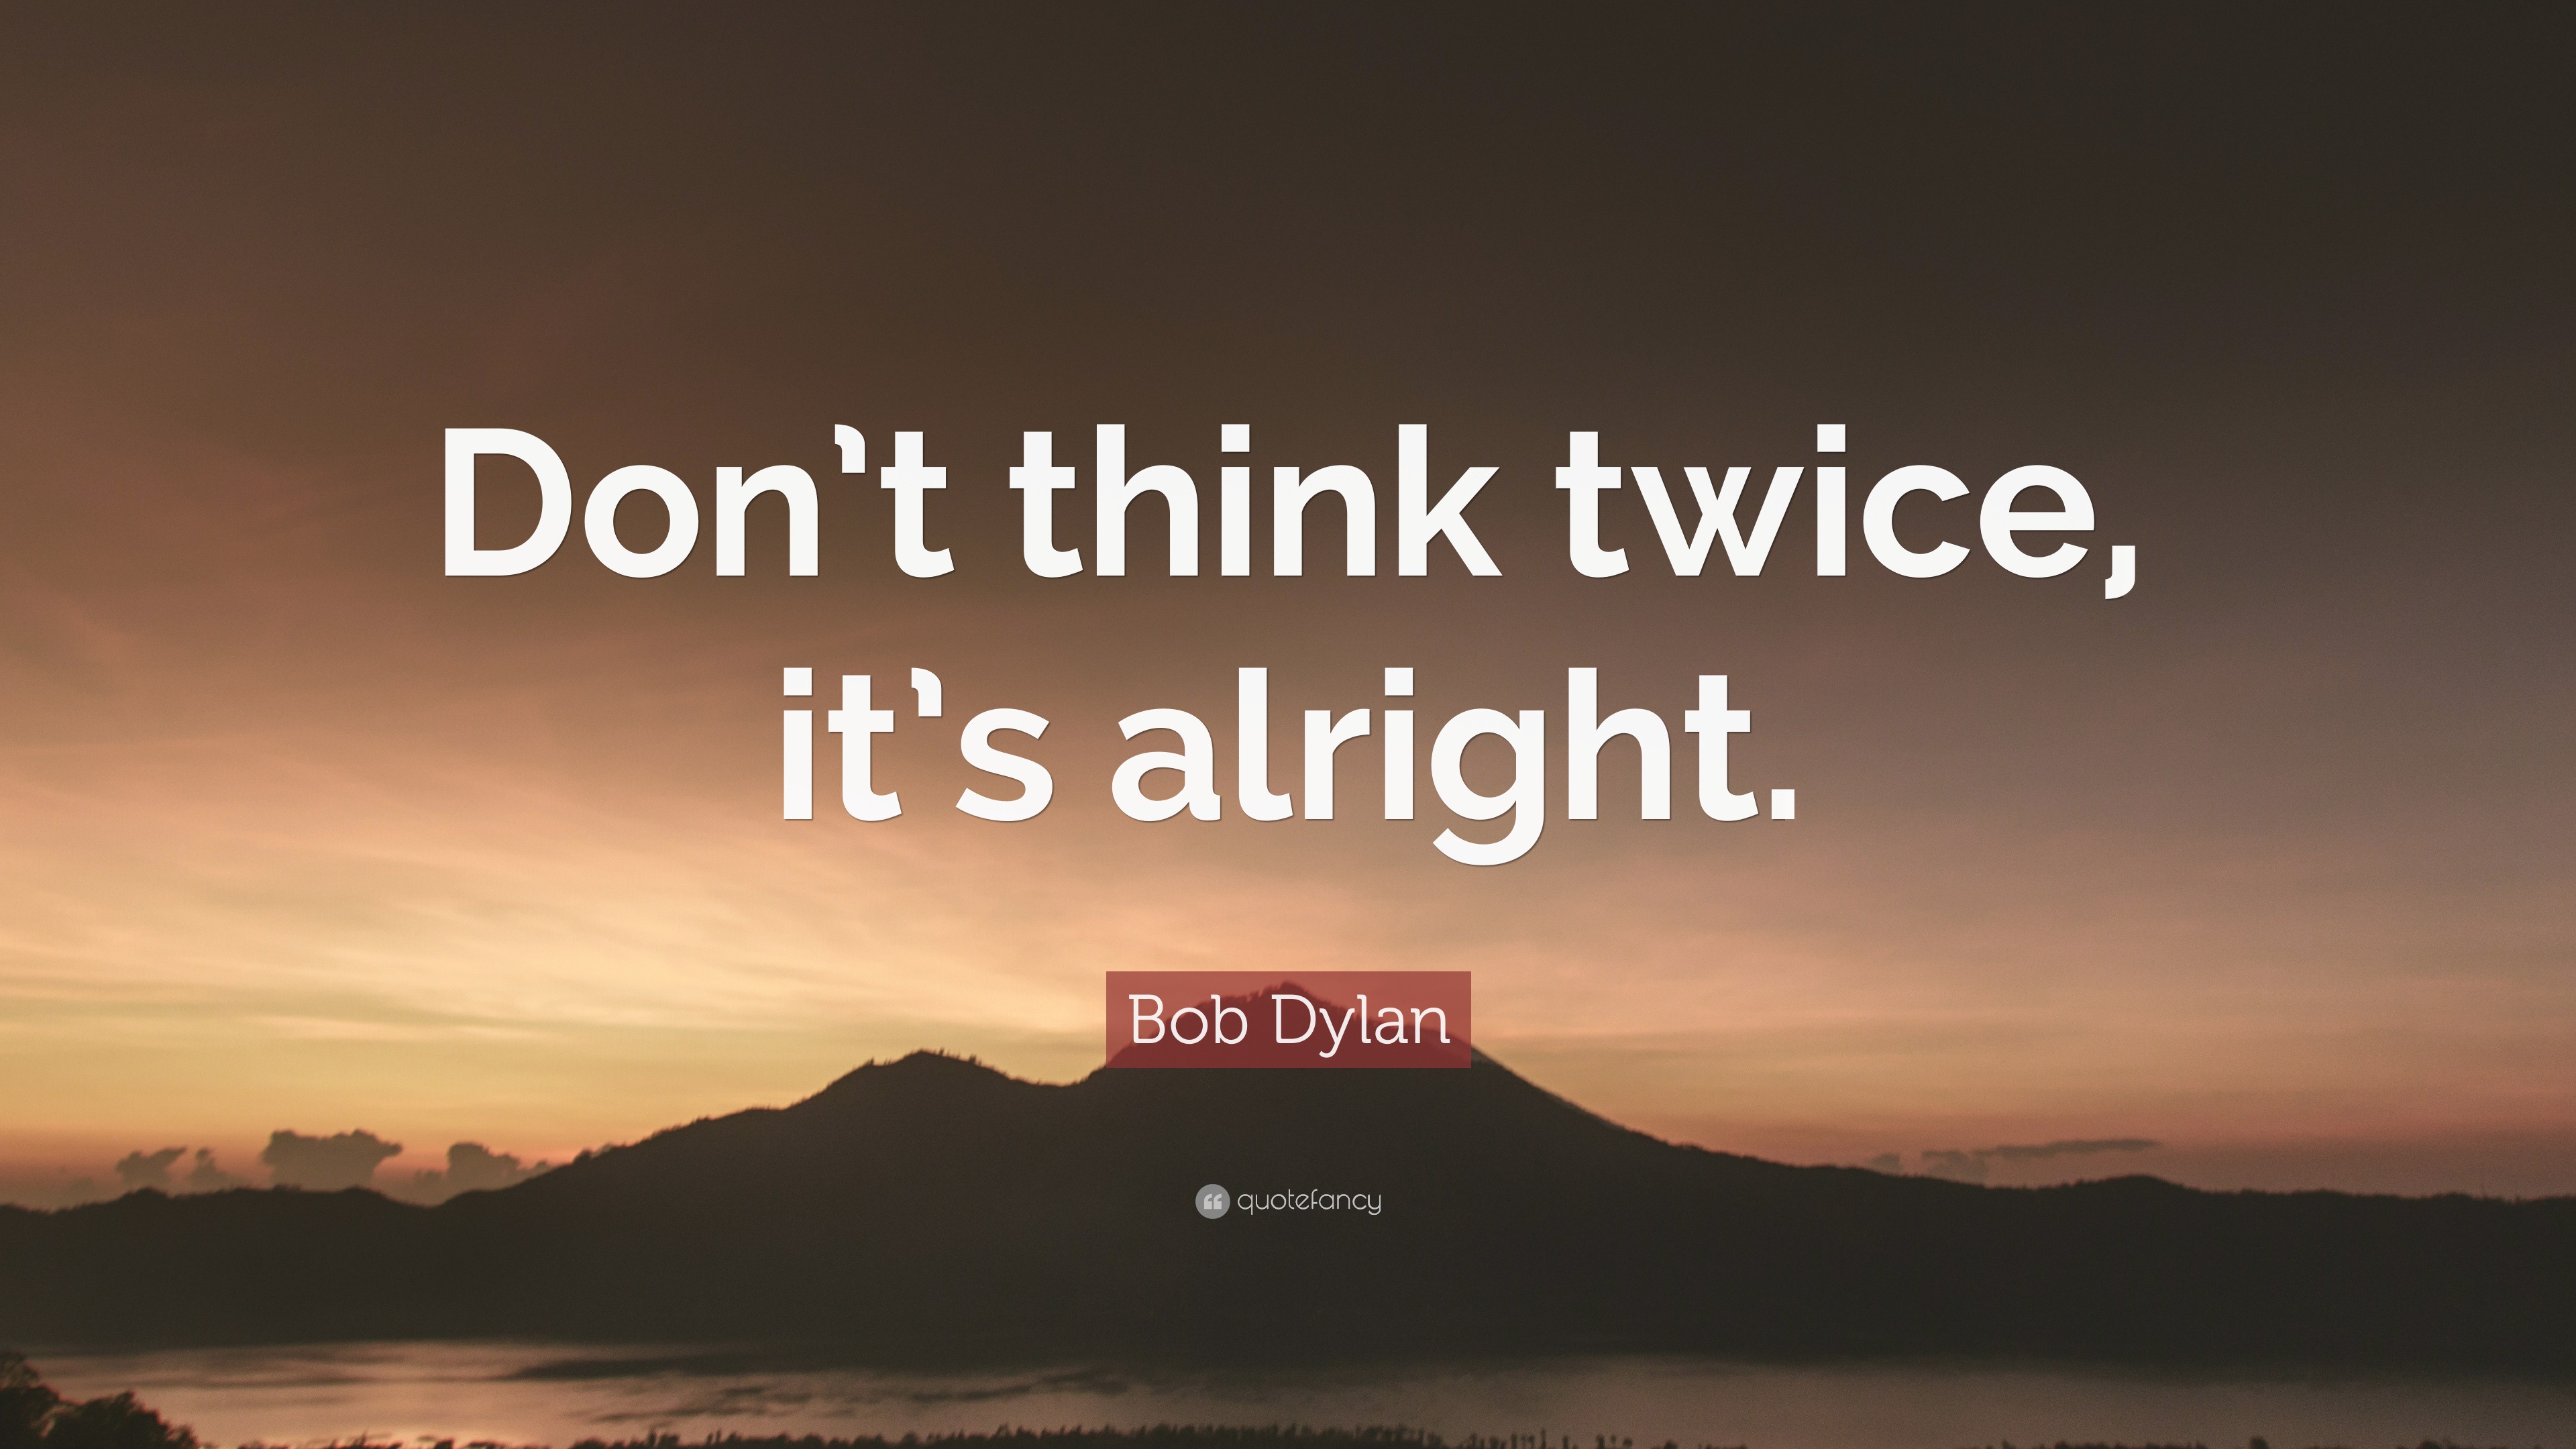 https://quotefancy.com/media/wallpaper/3840x2160/2044718-Bob-Dylan-Quote-Don-t-think-twice-it-s-alright.jpg